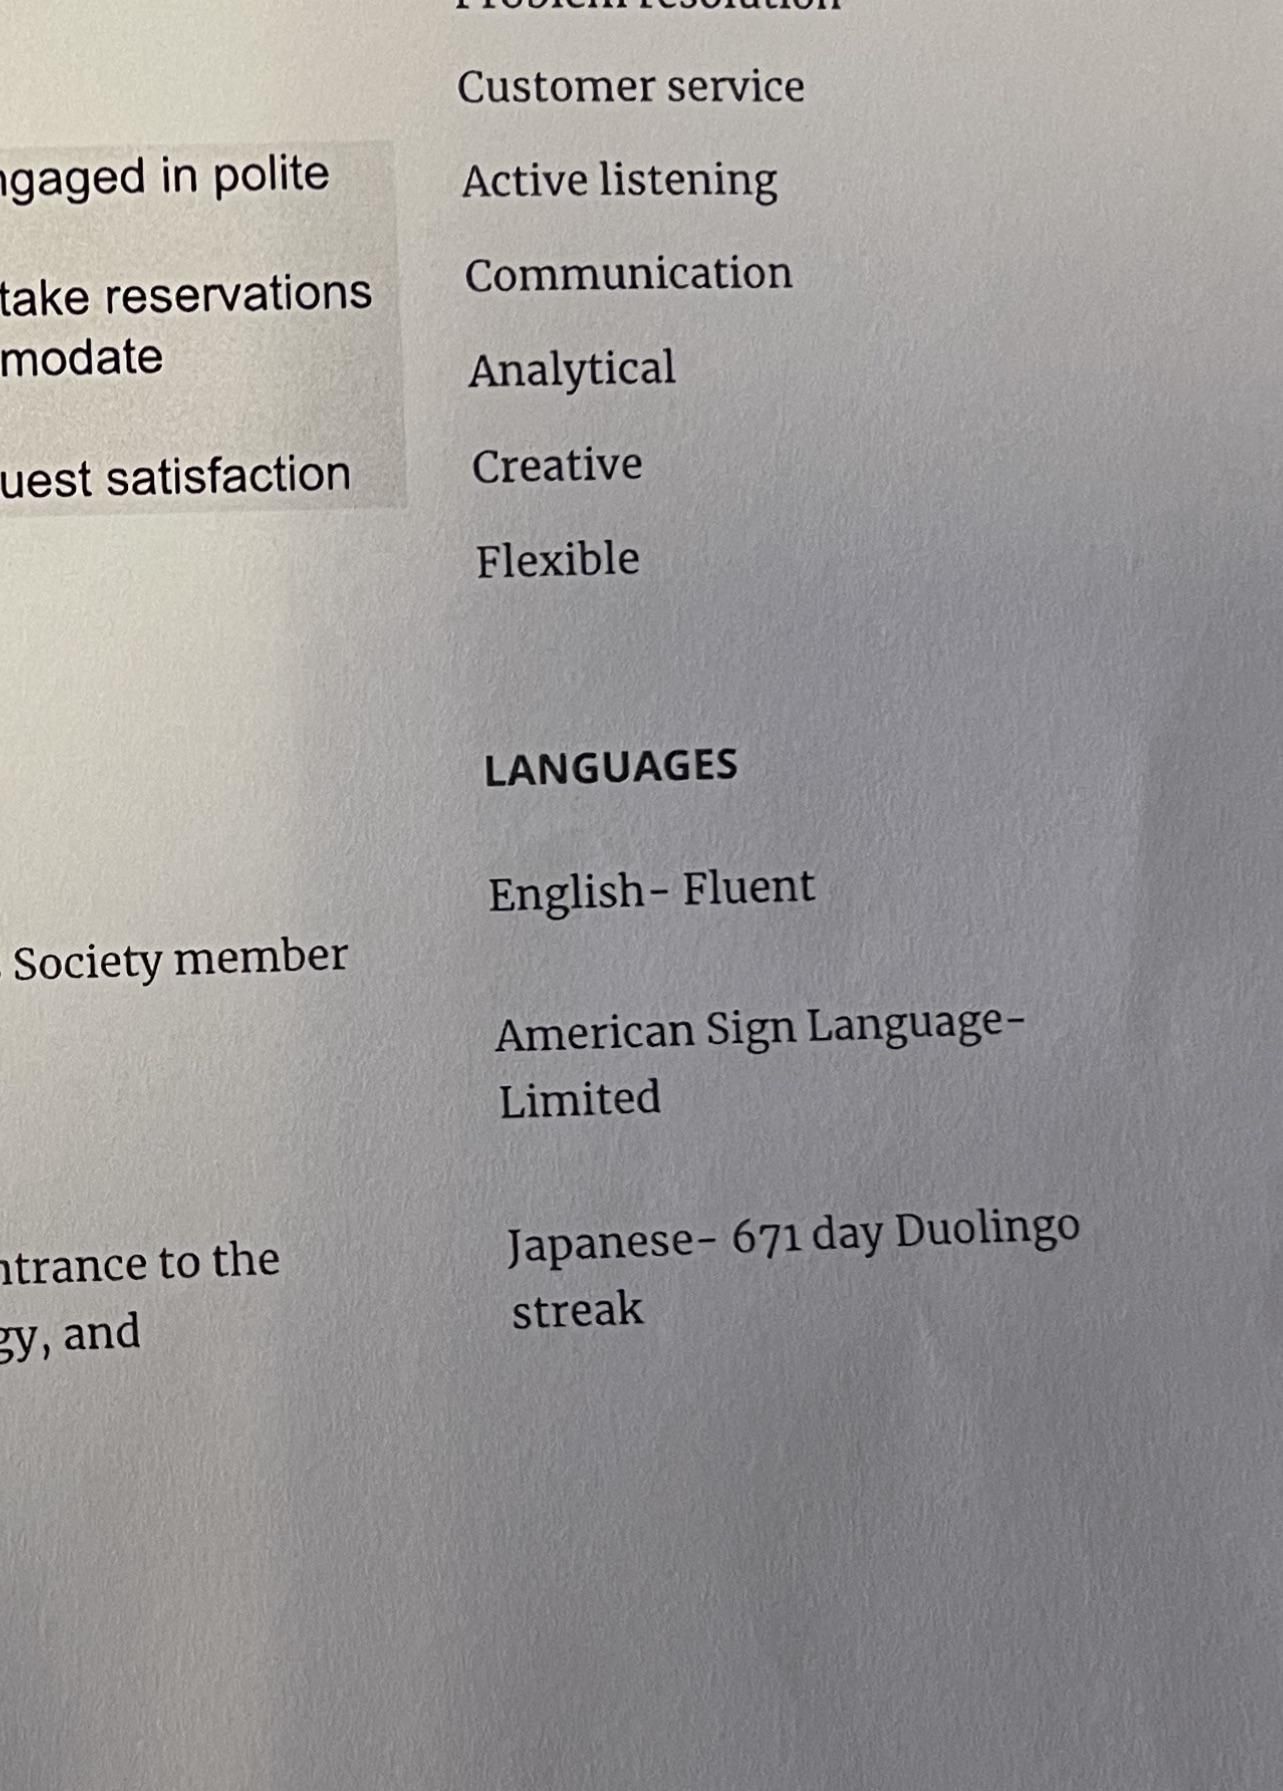 Someone sent a resume with their Duo Lingo streak under ‘Languages’